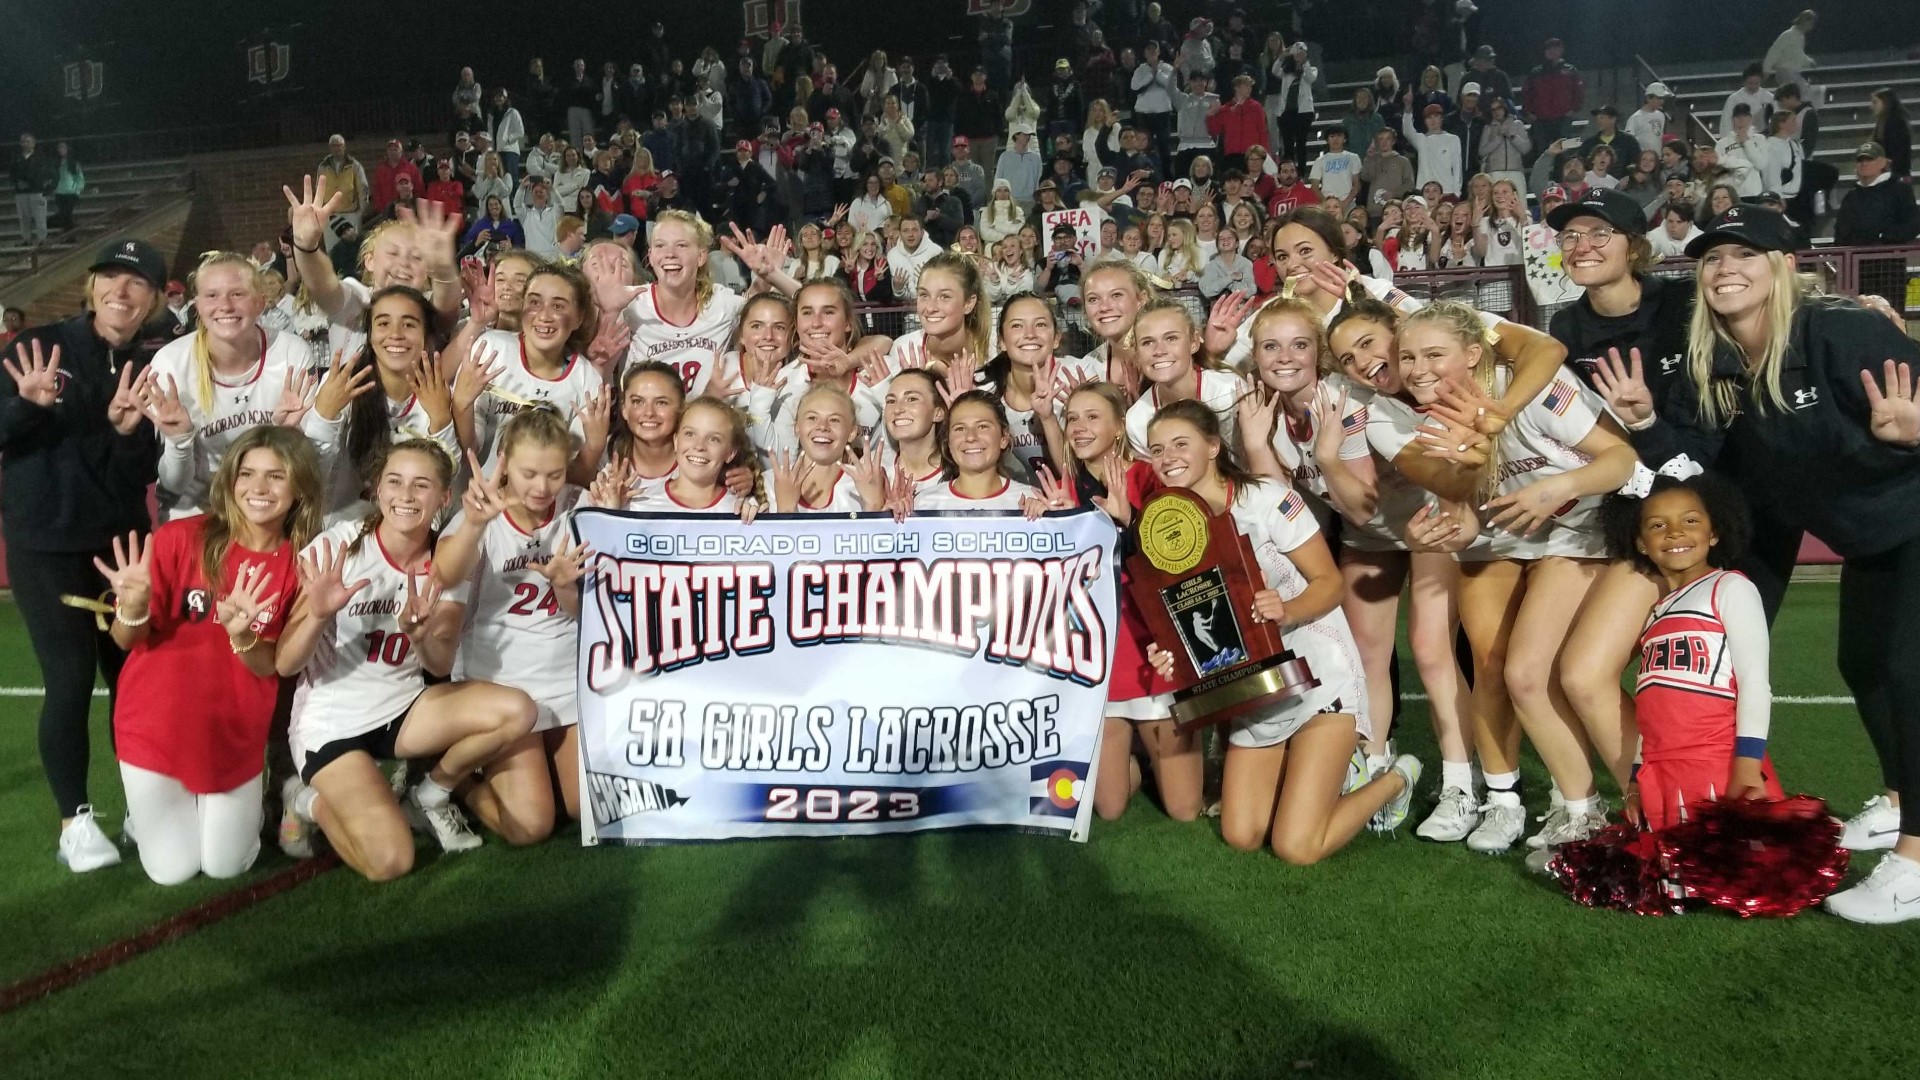 The Mustangs won their eighth consecutive state championship on Friday night by defeating Regis Jesuit.